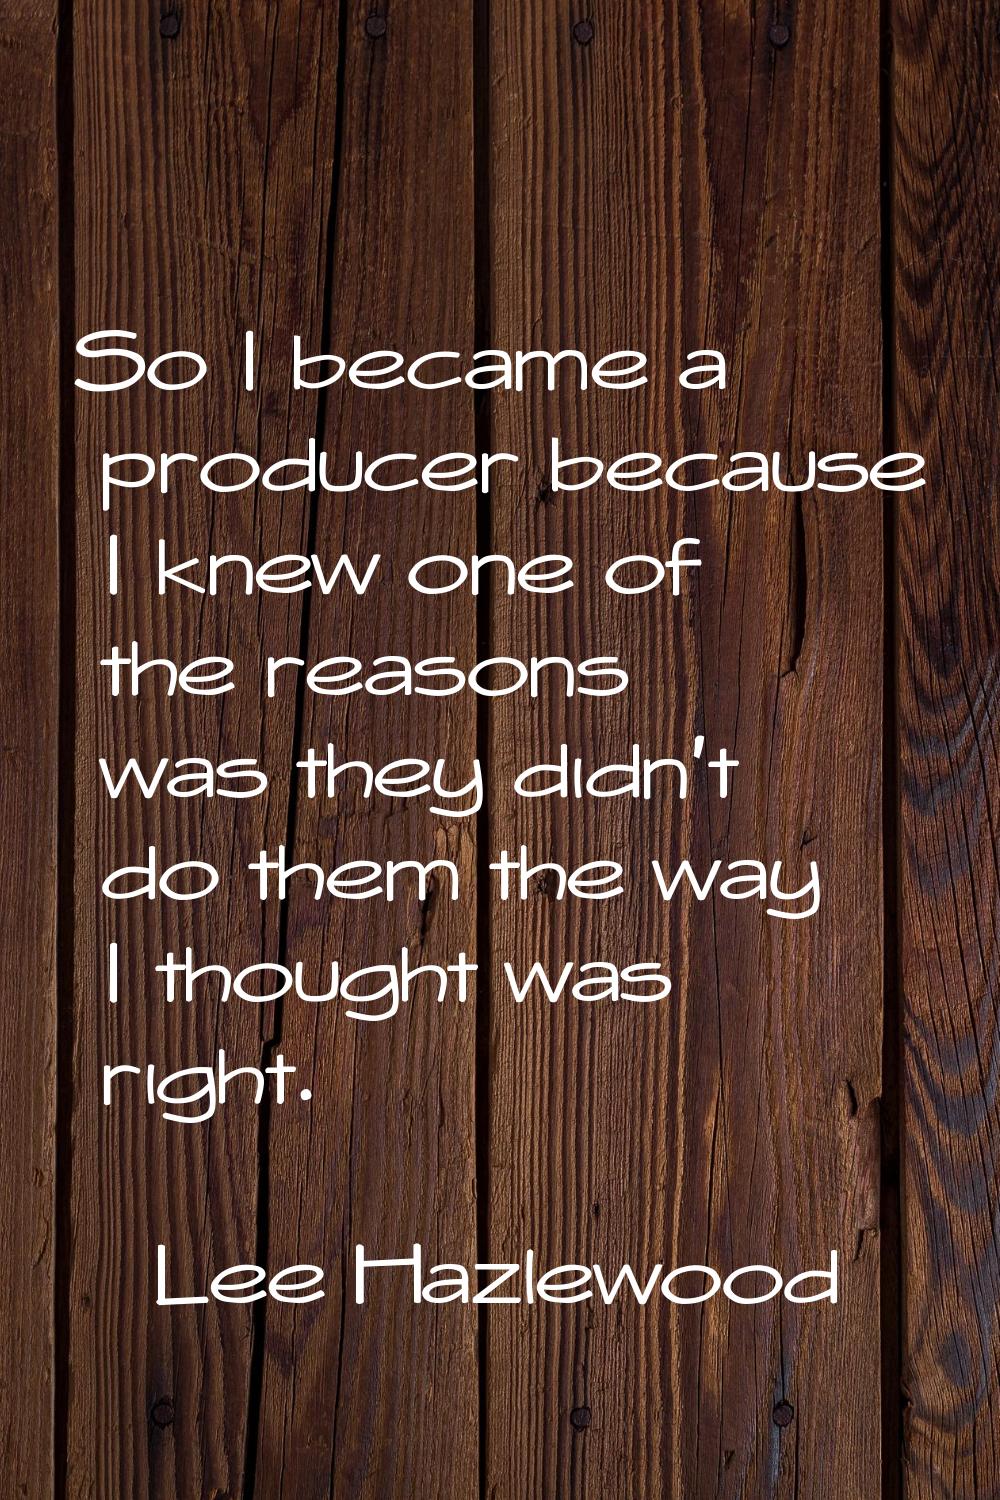 So I became a producer because I knew one of the reasons was they didn't do them the way I thought 